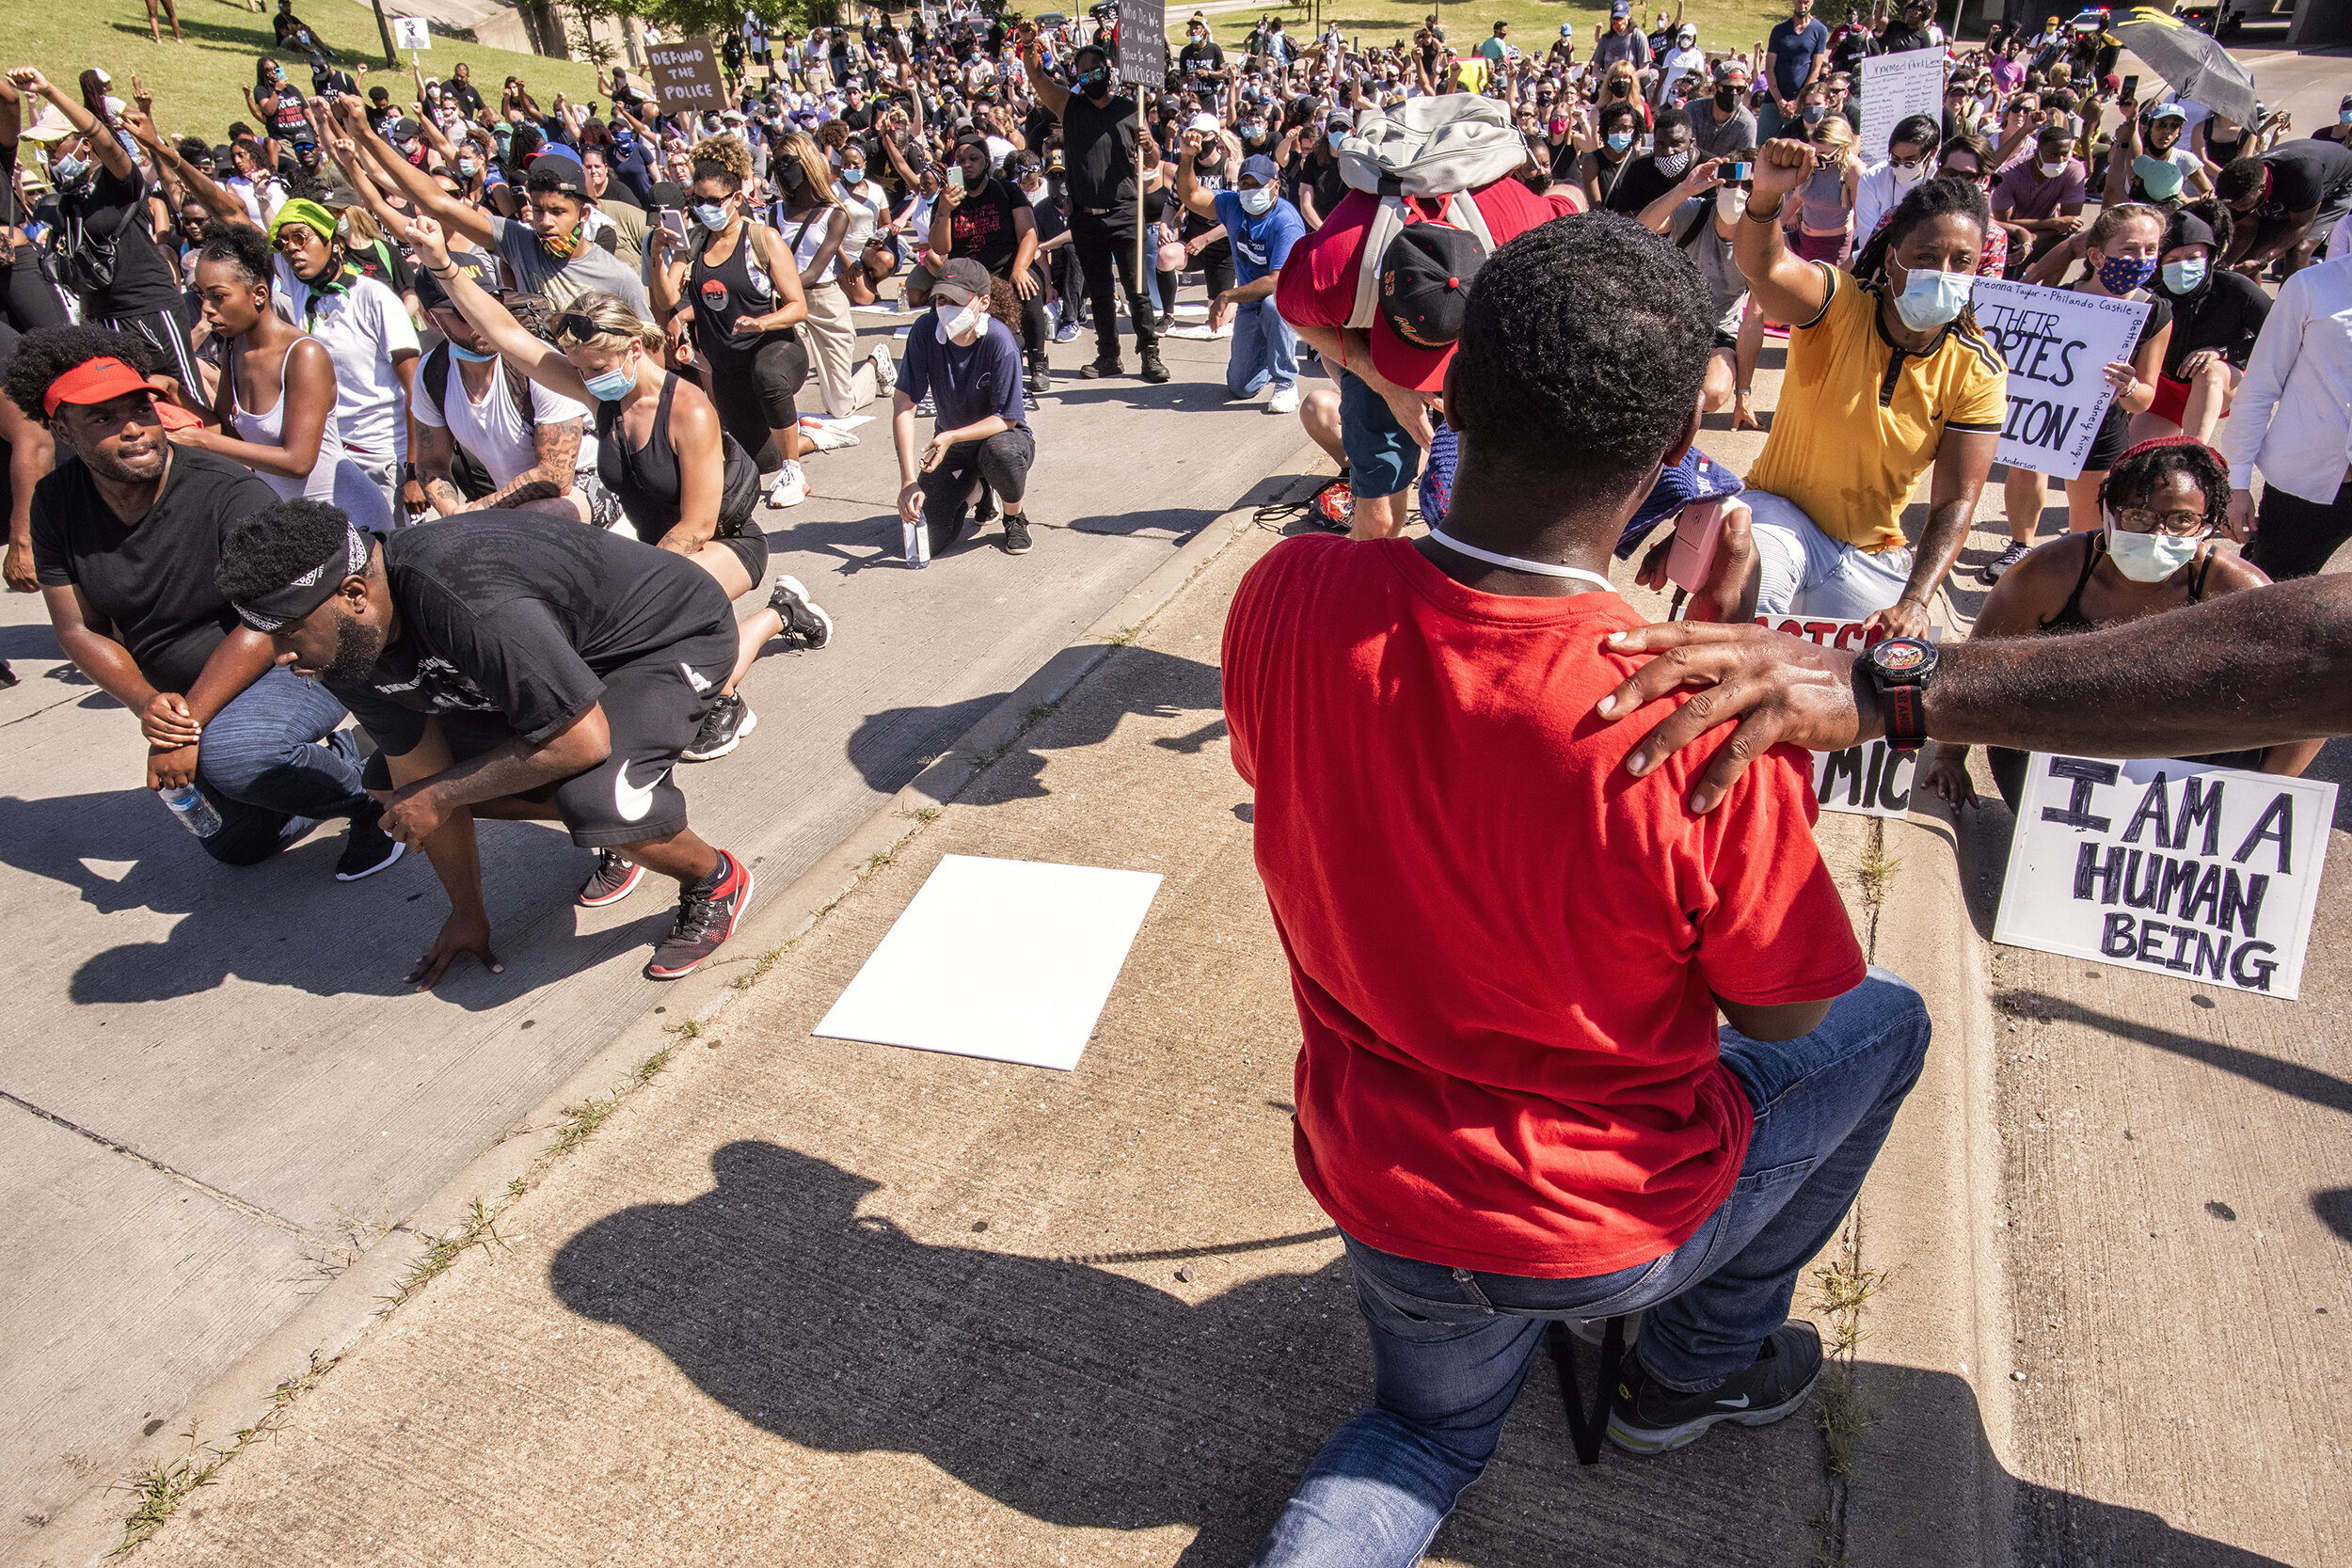  Activist Dominique Alexander takes a knee with protest marchers during the Black State of Emergency protest in Dallas, TX on June 13, 2020.  Alexander, president and founder of the Next Generation Action Network, a social justice organization, kneel